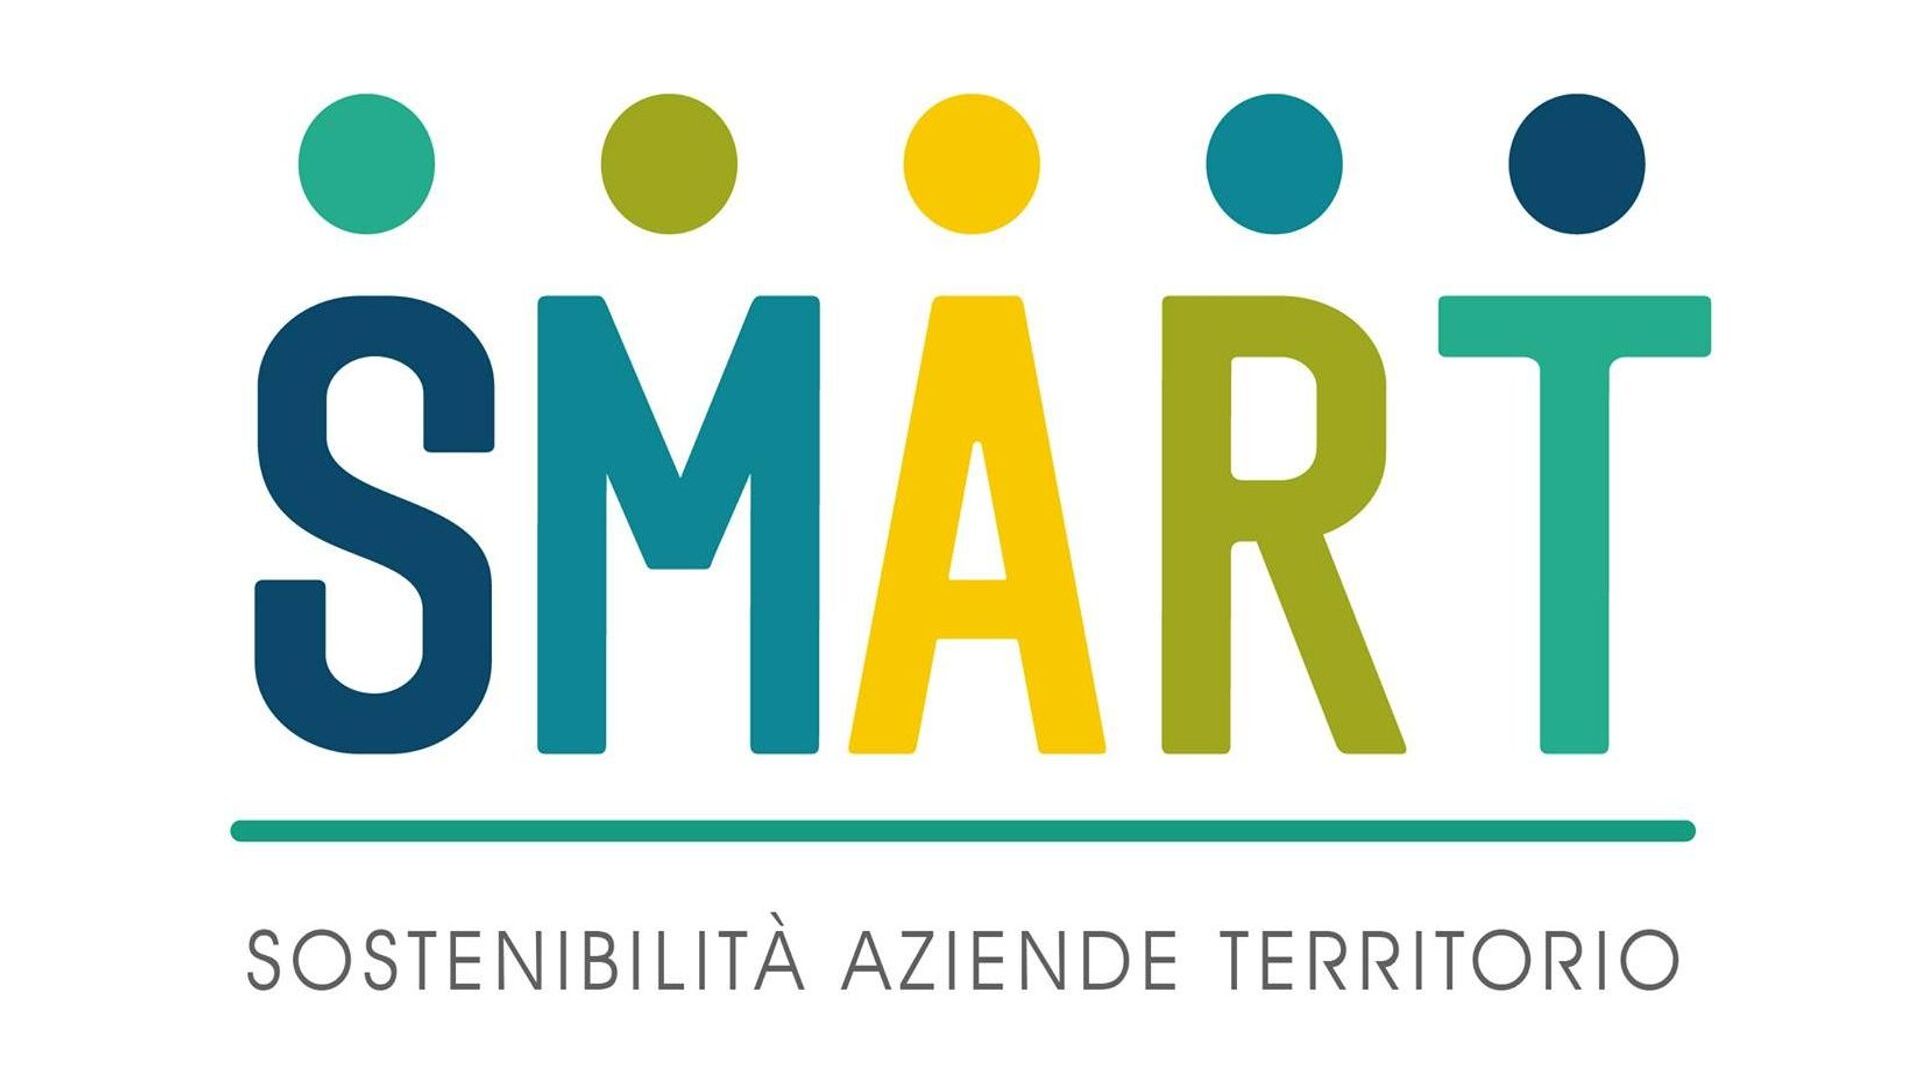 Logo SMART projekta (Sustainable Strategies and Responsible Business Models in the Cross-Border Territory)